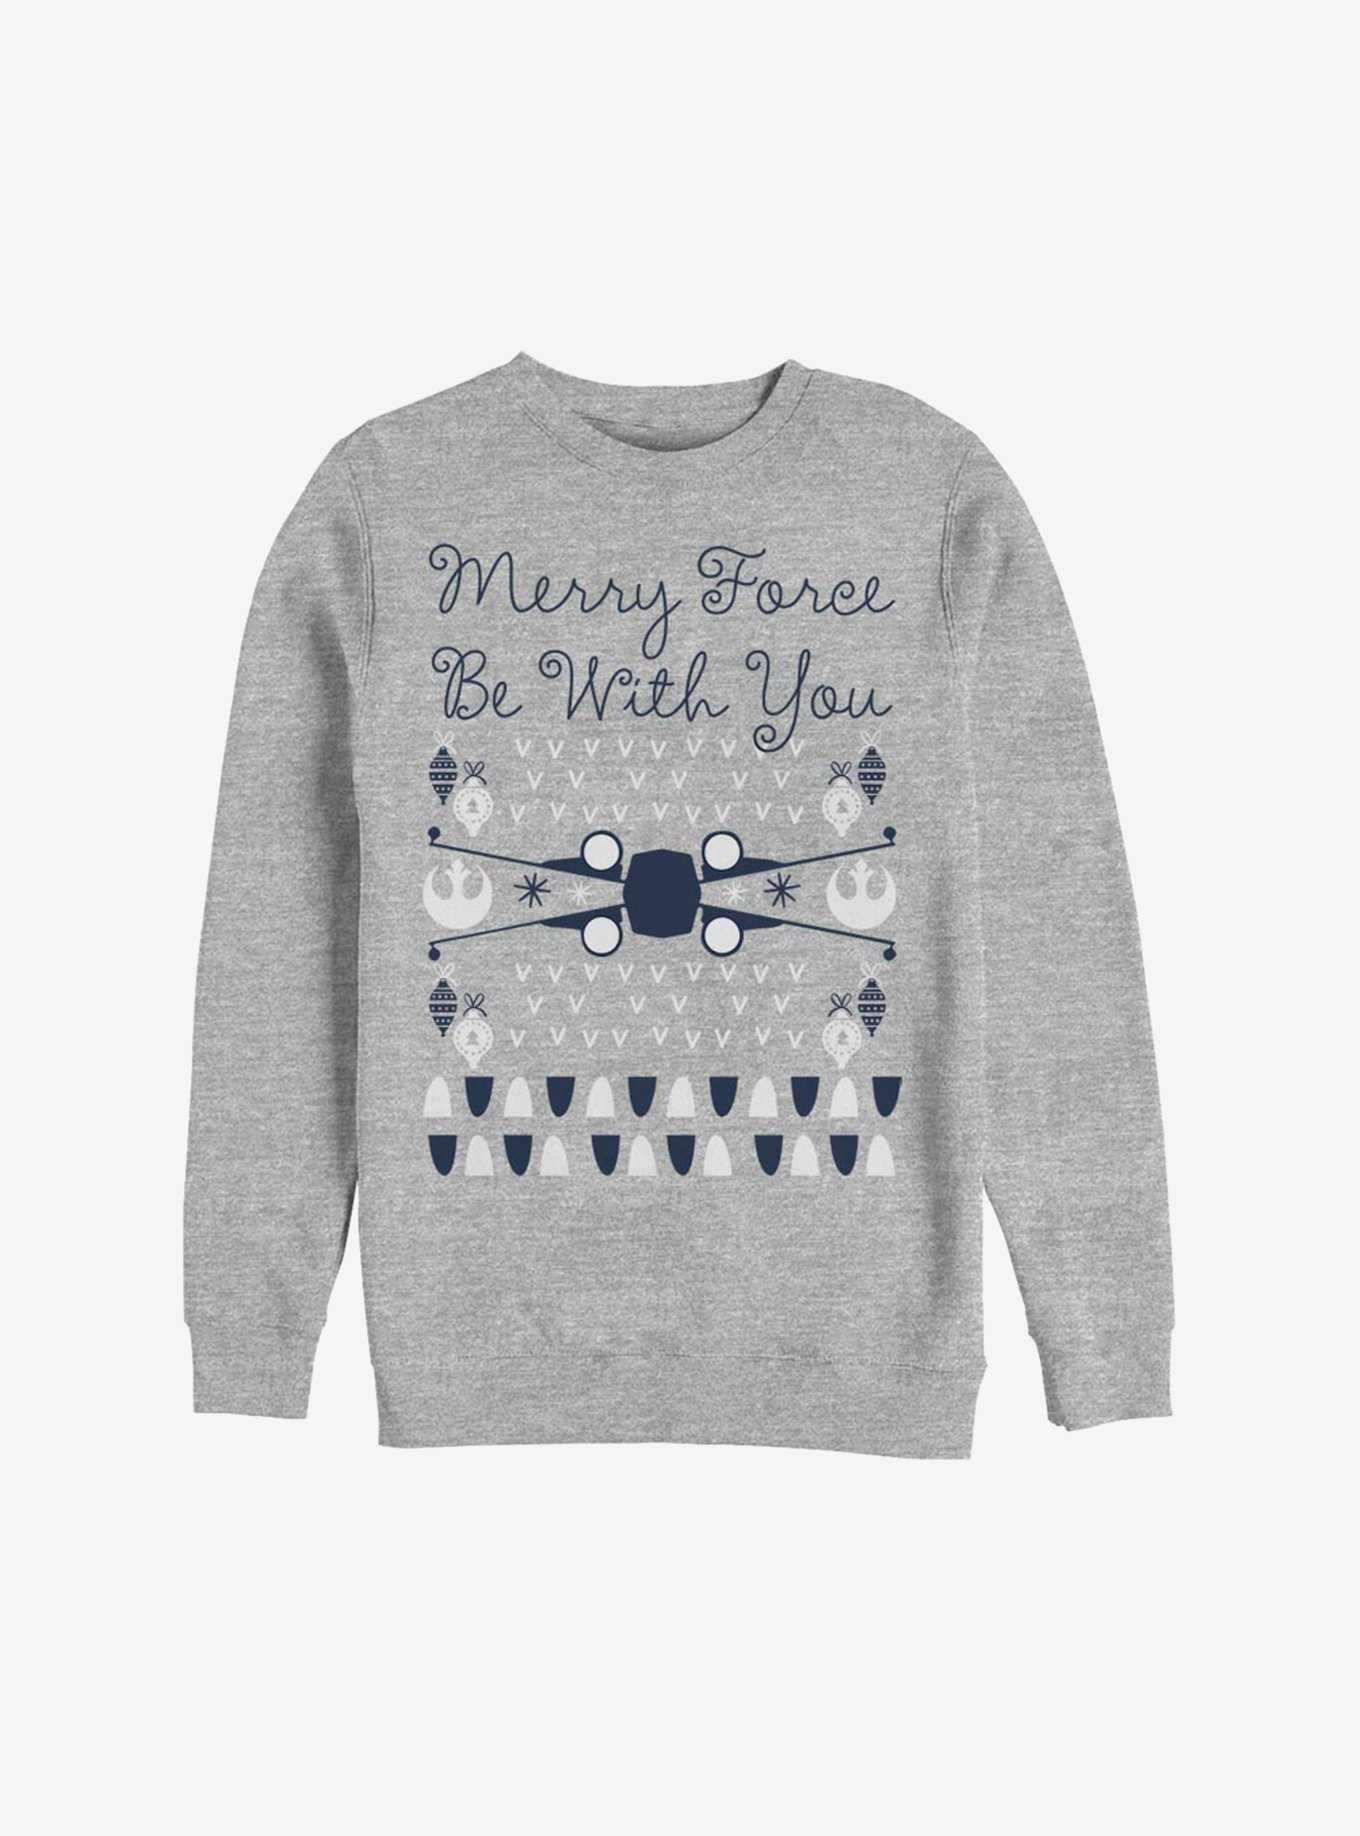 Star Wars Merry Force Be With You Christmas Pattern Sweatshirt, , hi-res